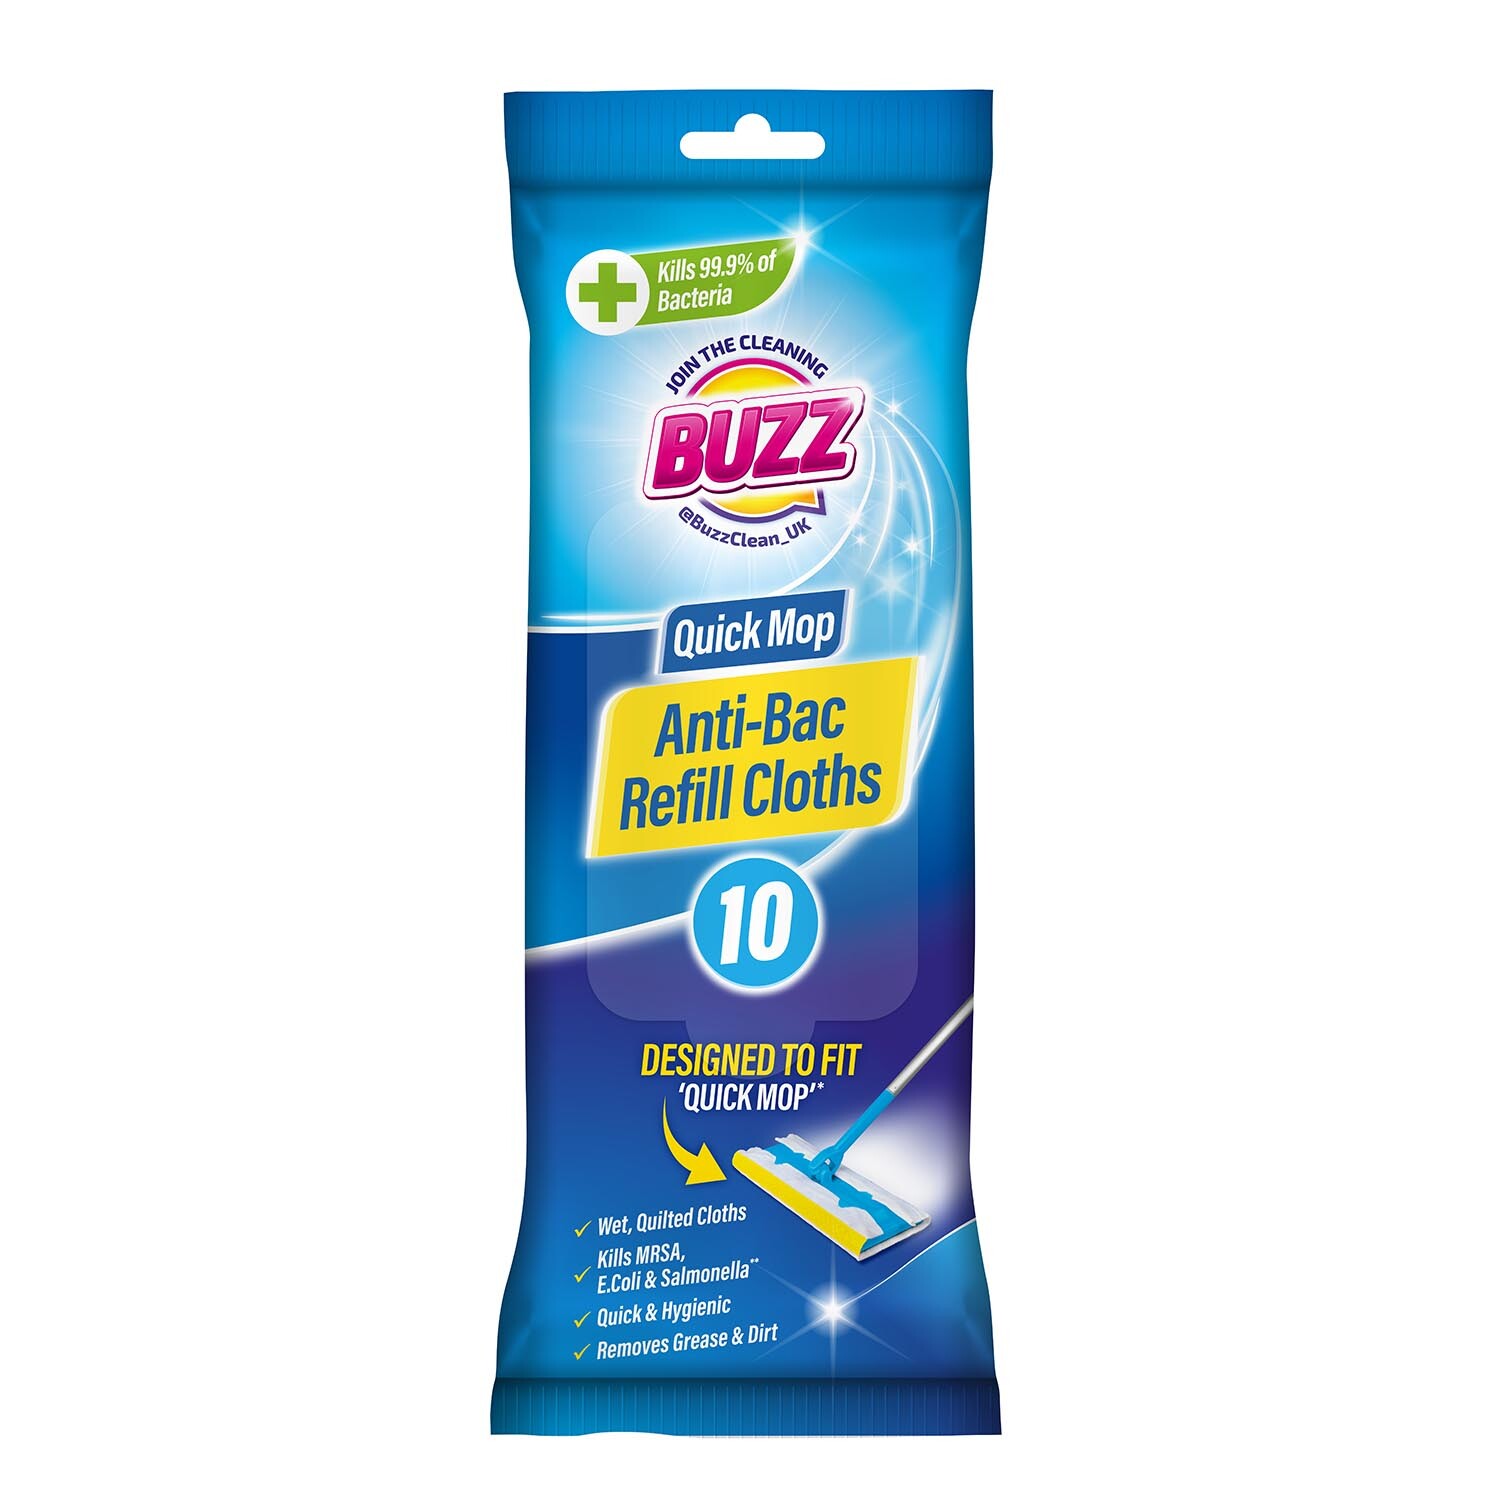 Buzz Anti Bacterial Mop Head with Refill Cloths Image